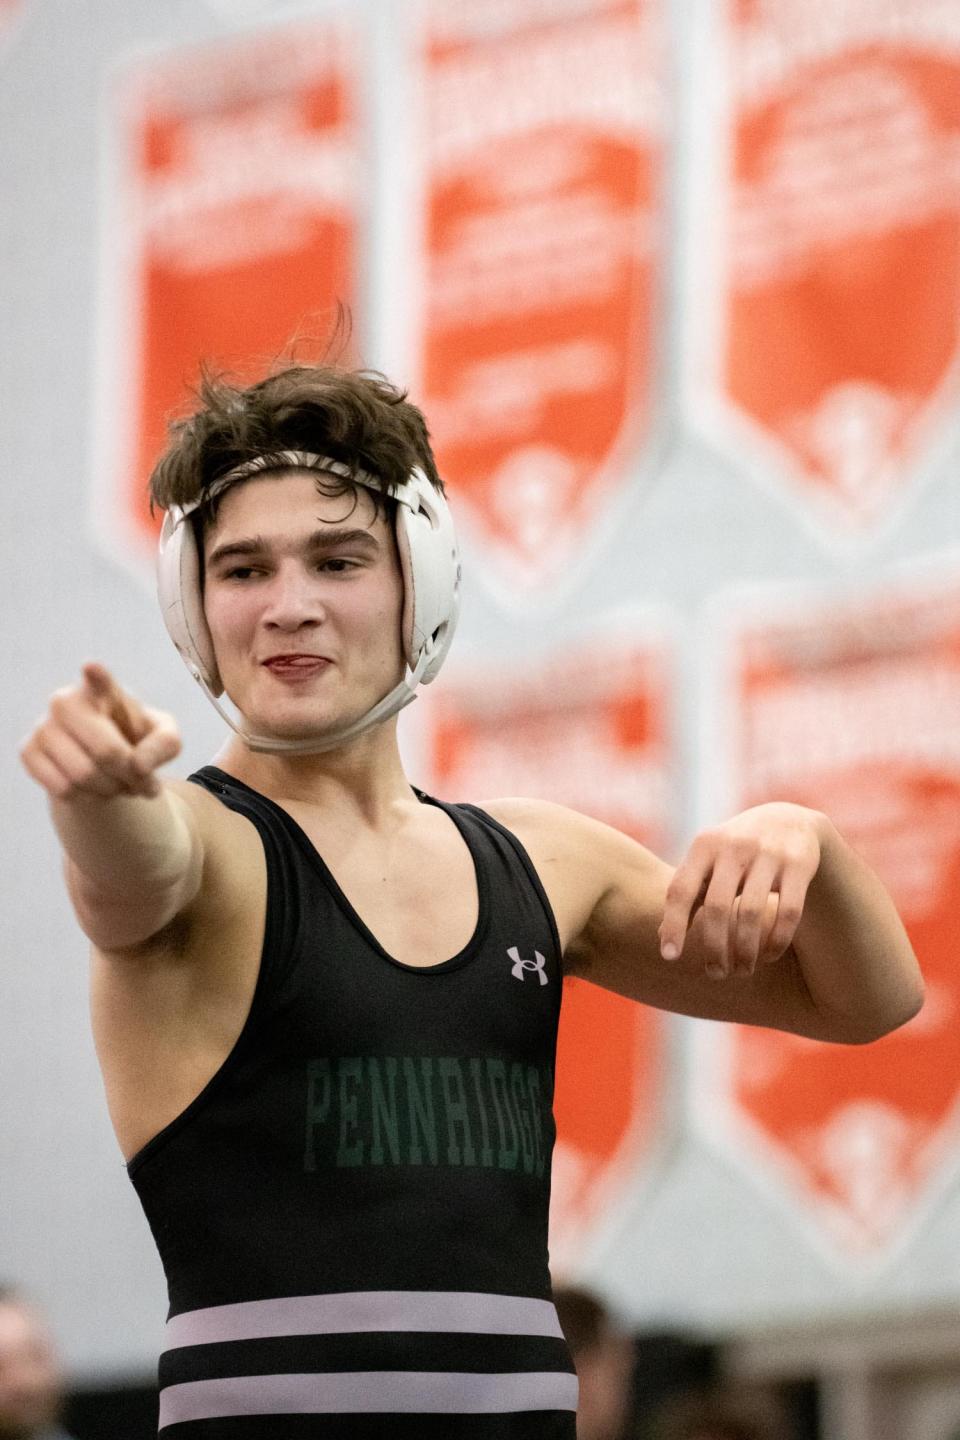 Pennridge's Sam Kuhns celebrates after defeating Oxford's Austin McMillan in the 139-pound championship match at the PIAA District One Southeast Regional Class 3A Tournament hosted at Souderton Area High School in Franconia on Saturday, March 4, 2023.